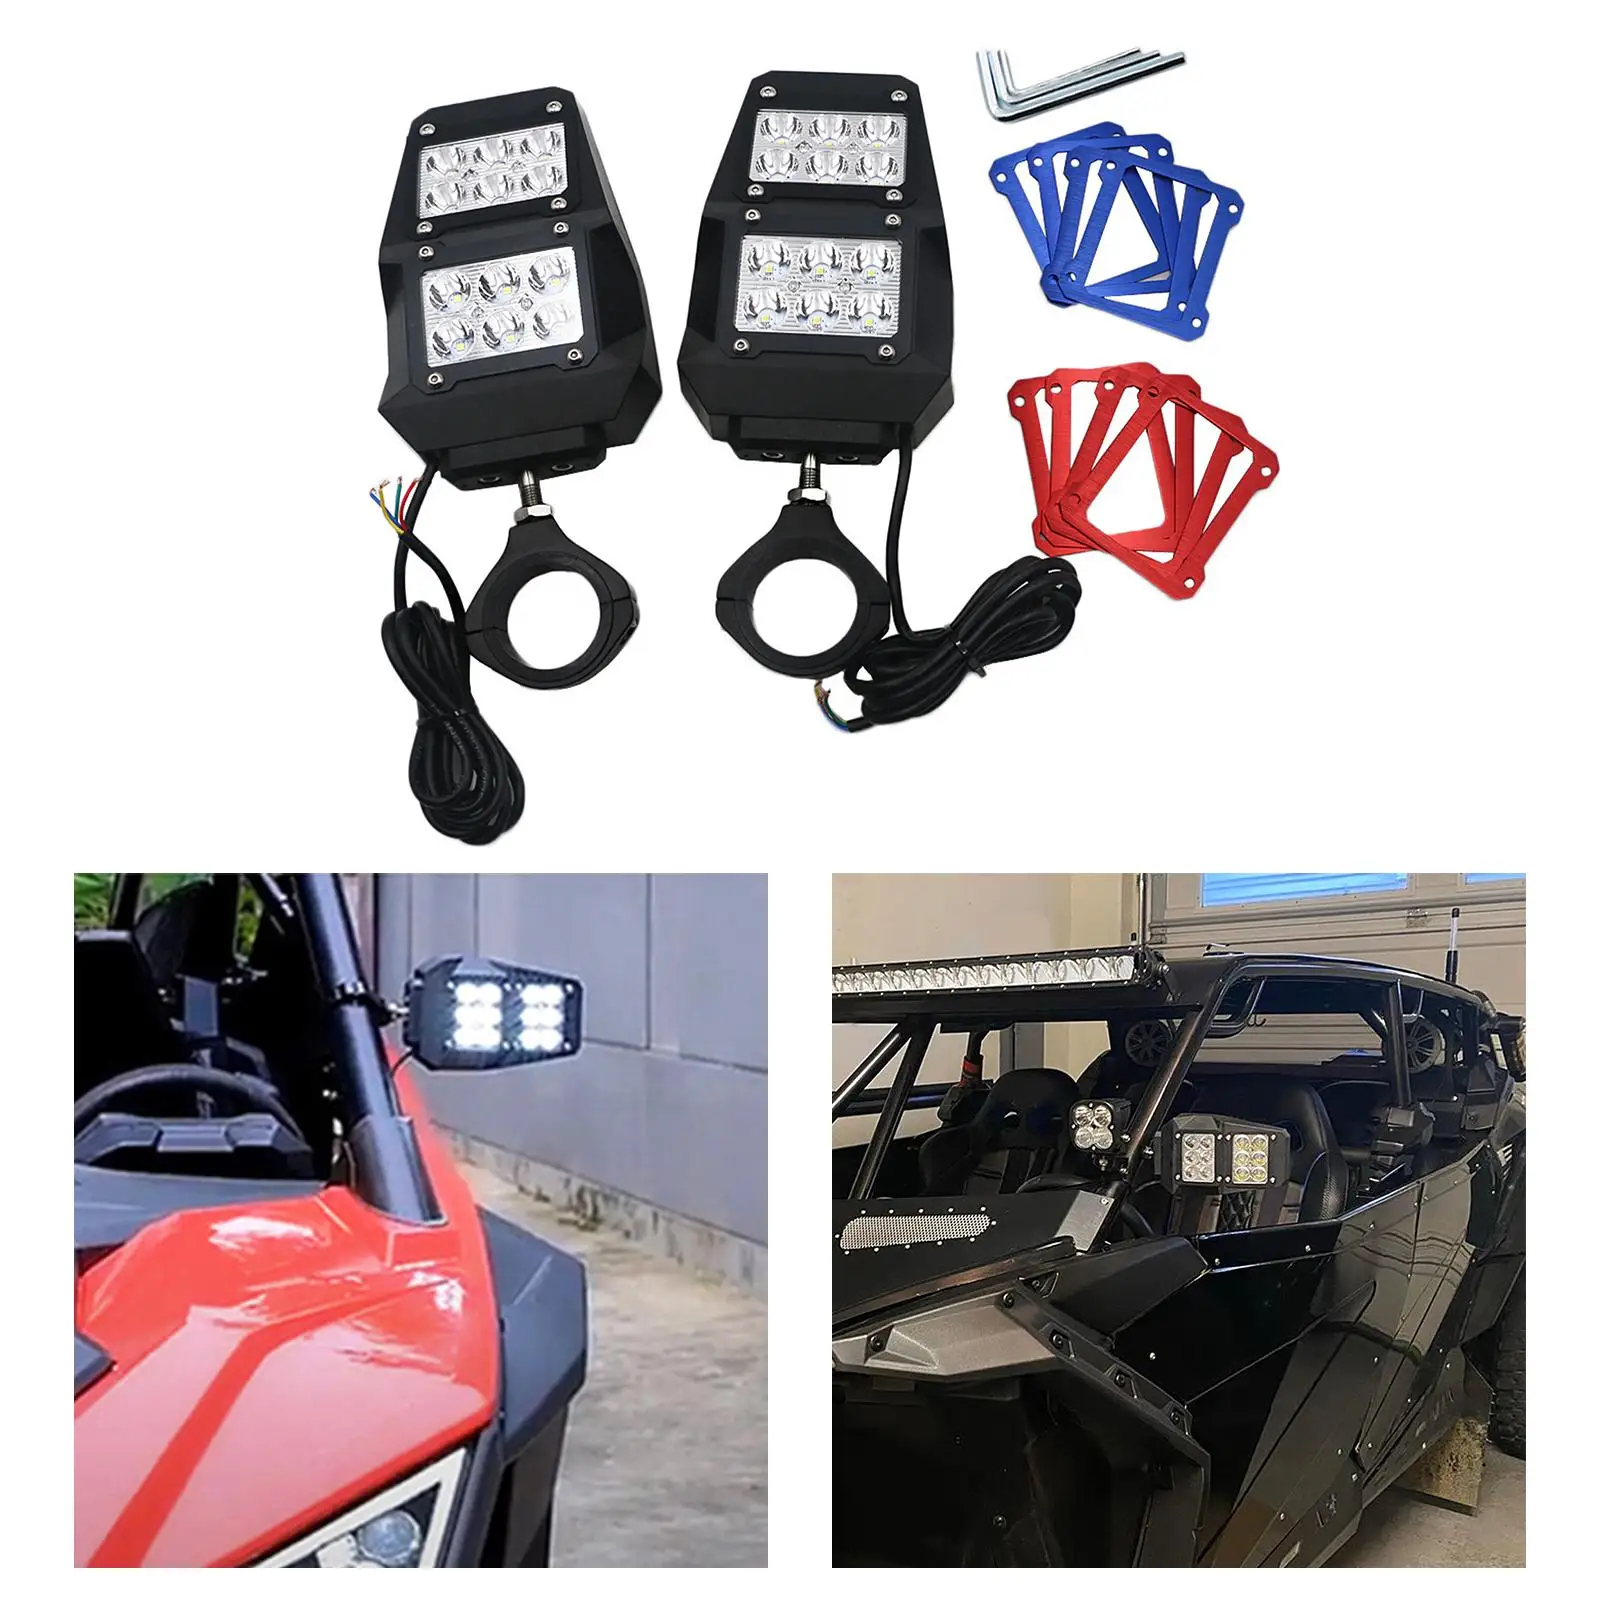 All Topography Vehicle UTV/ATV Mirror with Light Rustproof for Accessories